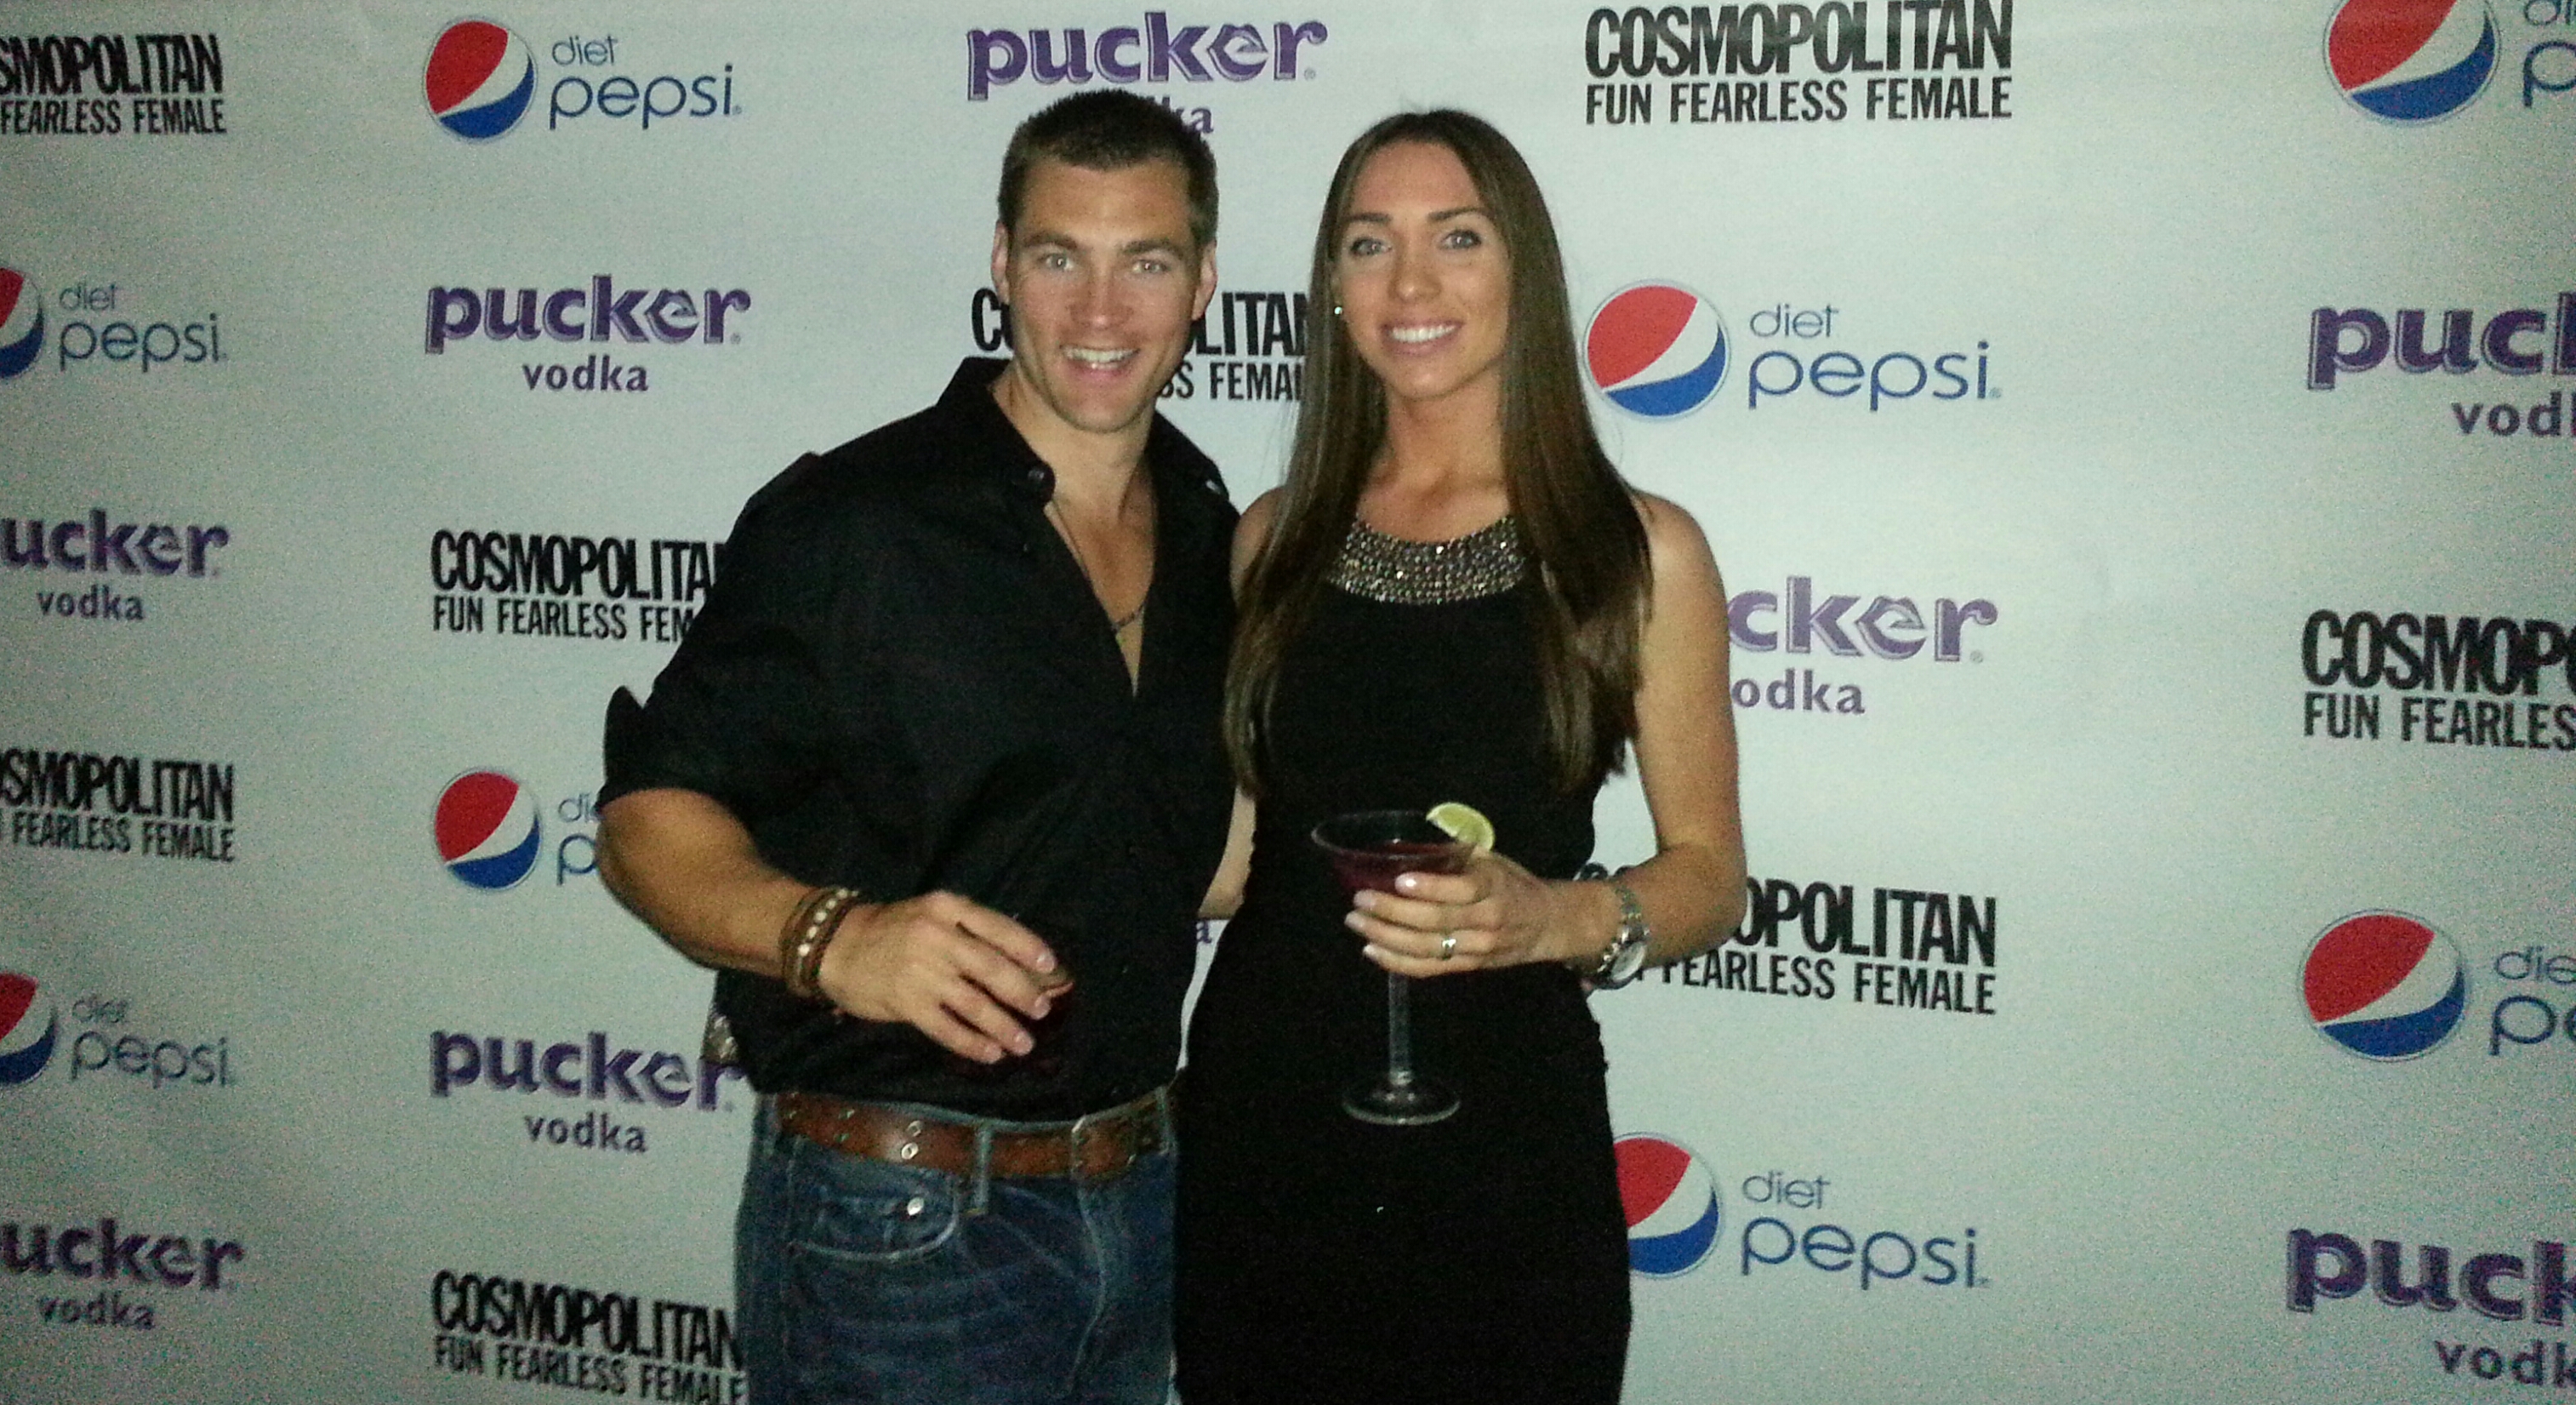 Tyler with his date at the Cosmo Bachelor Reunion party in NYC.